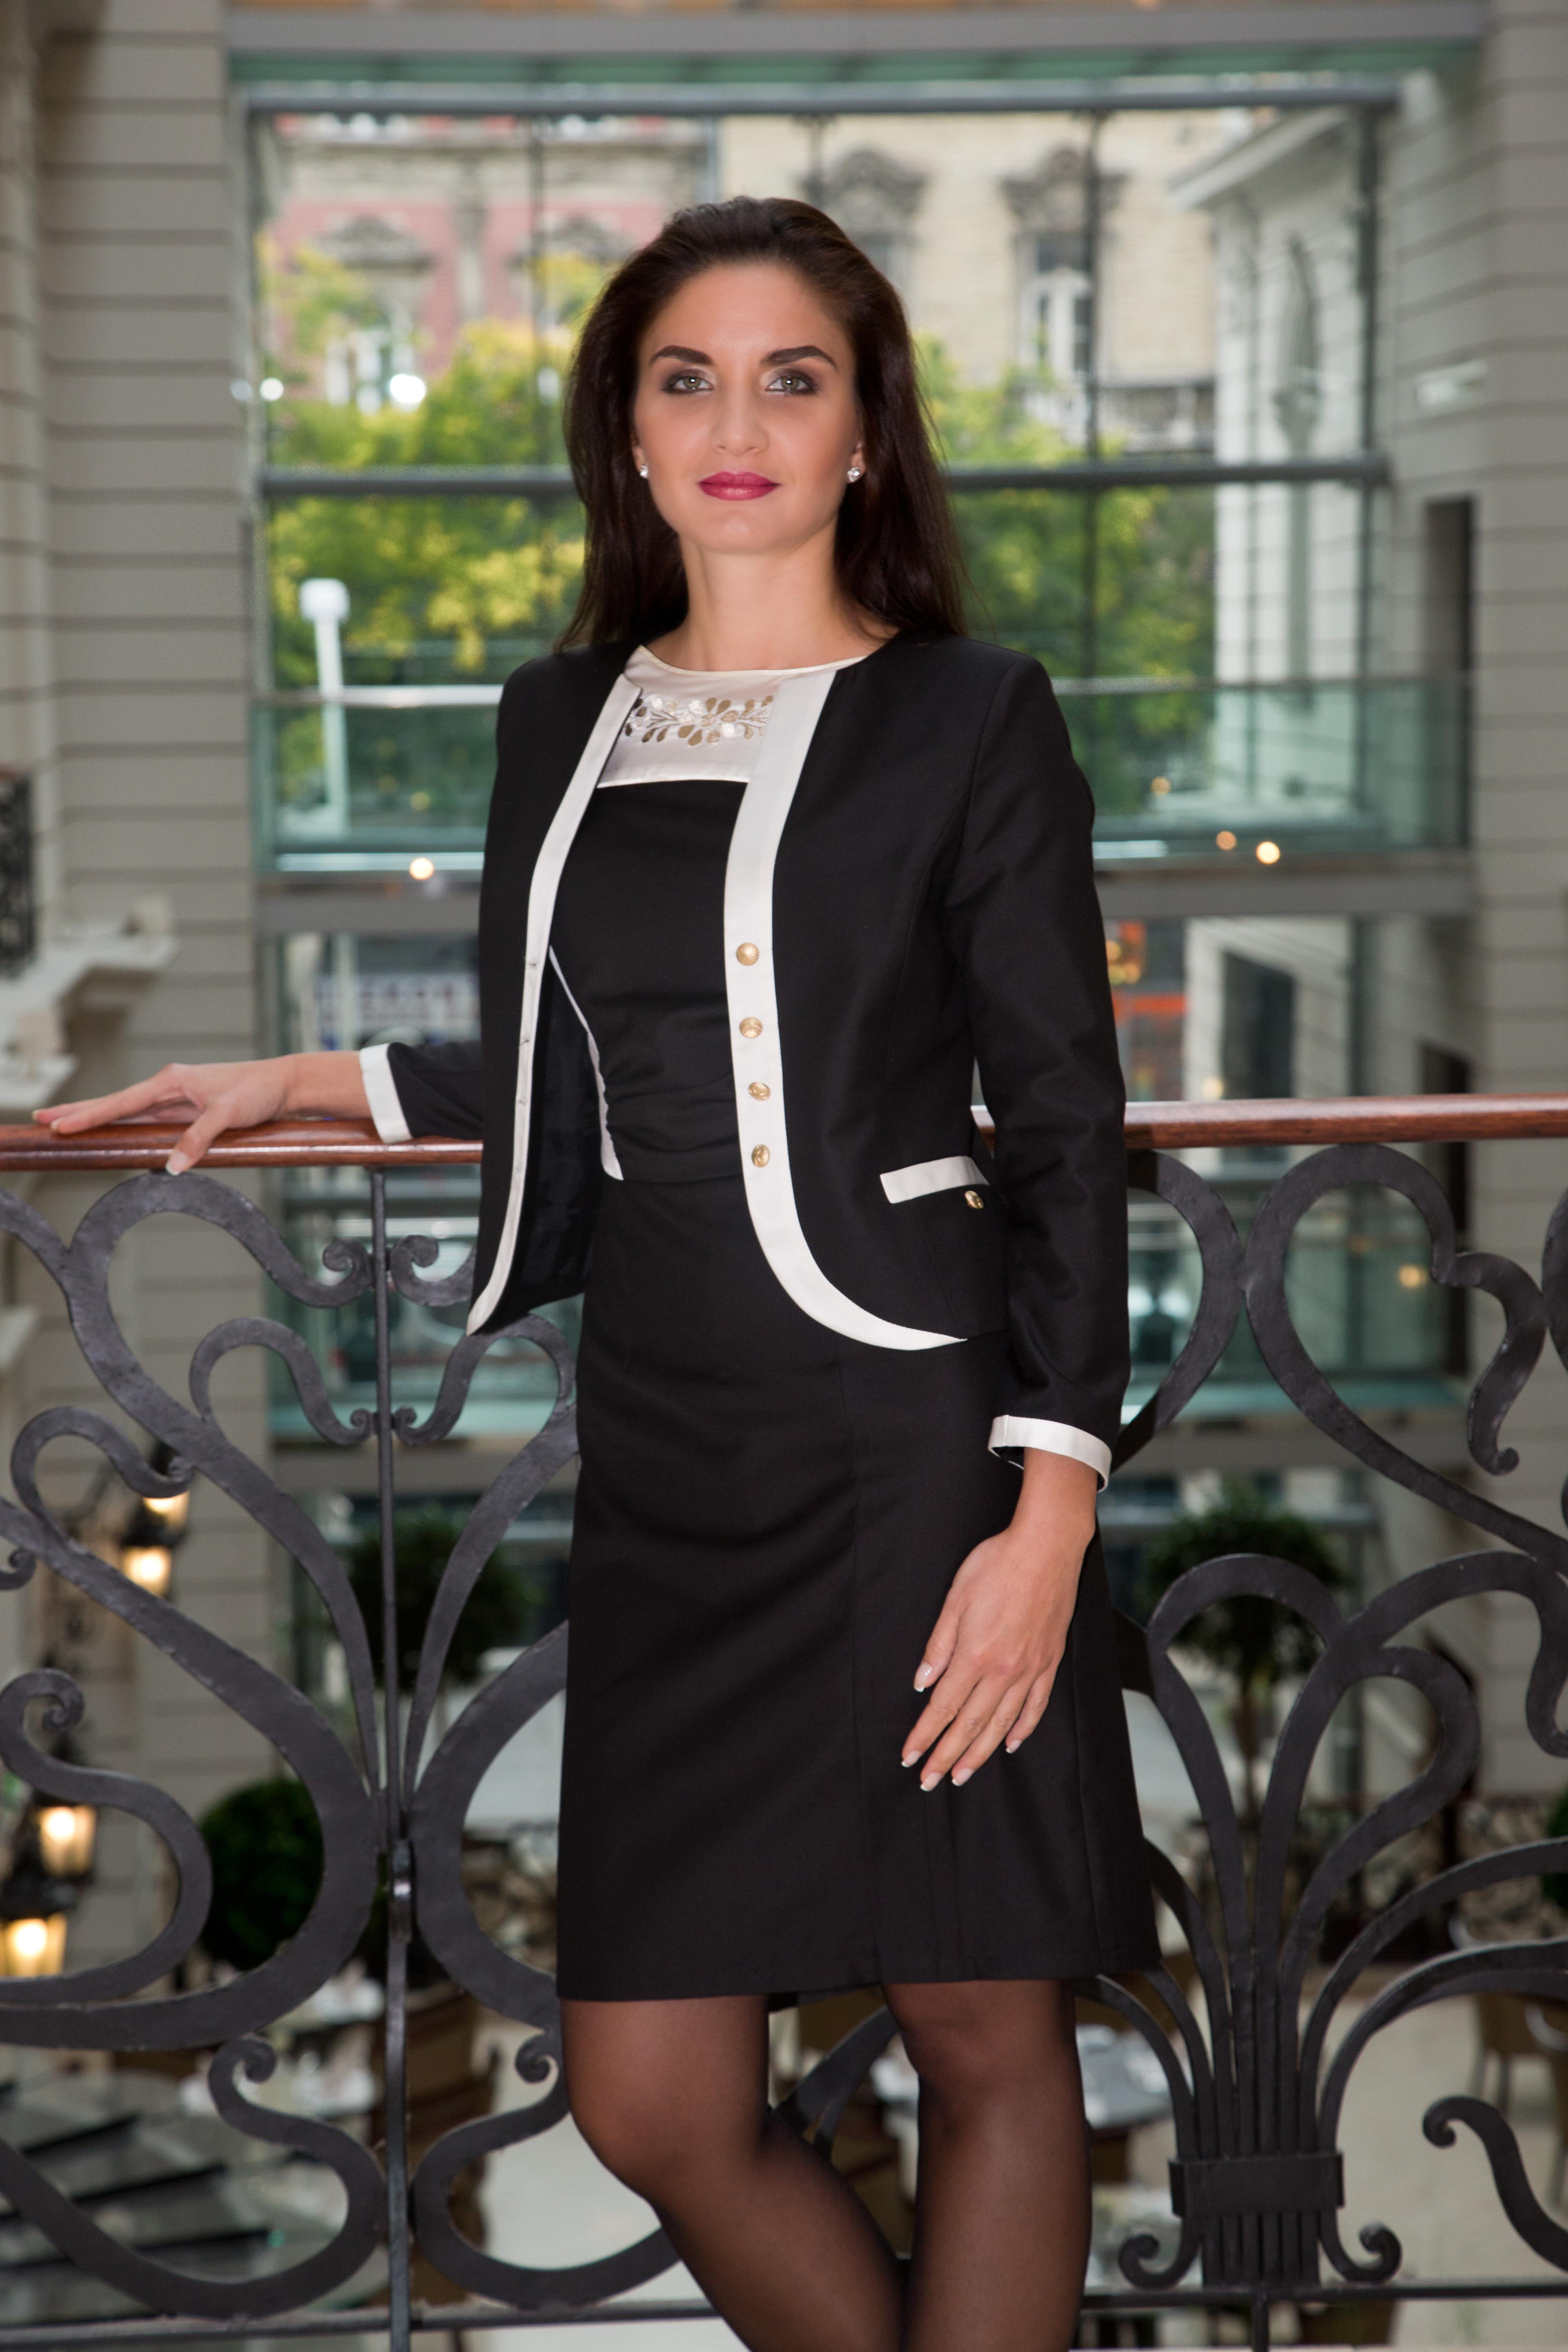 Corinthia Hotel Budapest Presented Its Designer Staff Uniforms Ornamented With Hungarian Motifs